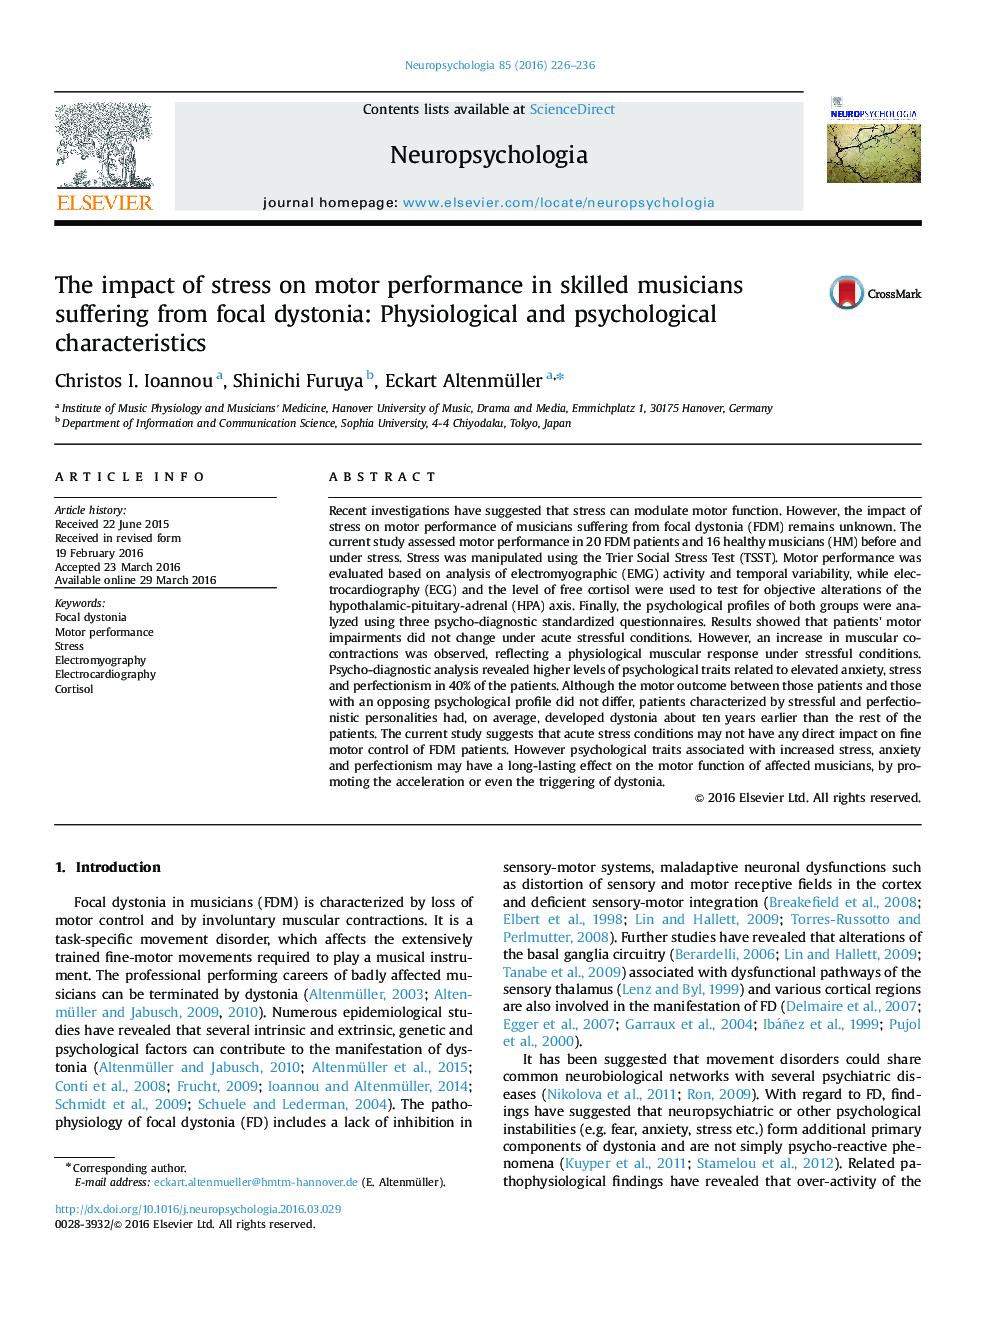 The impact of stress on motor performance in skilled musicians suffering from focal dystonia: Physiological and psychological characteristics